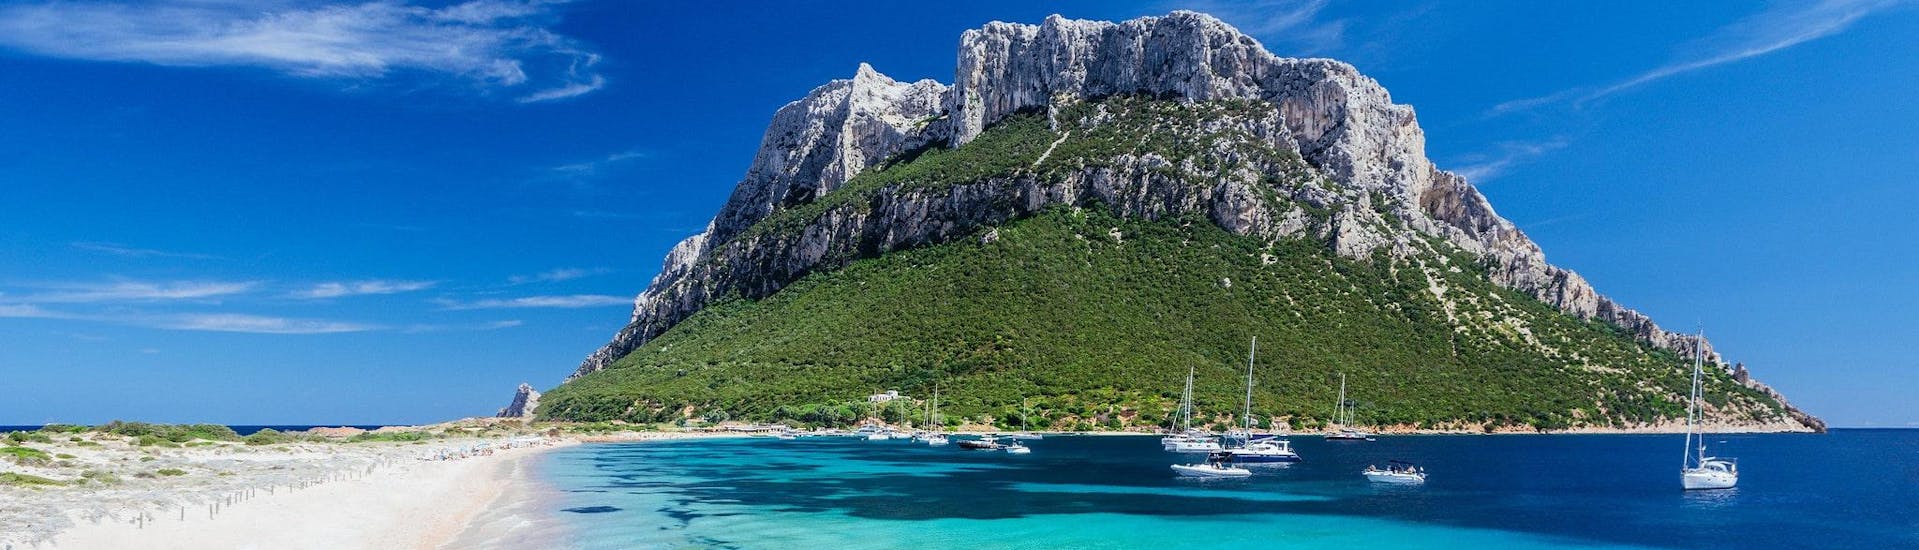 View of Tavolara island, which is a popular destination for boat trips from Olbia in Sardinia.